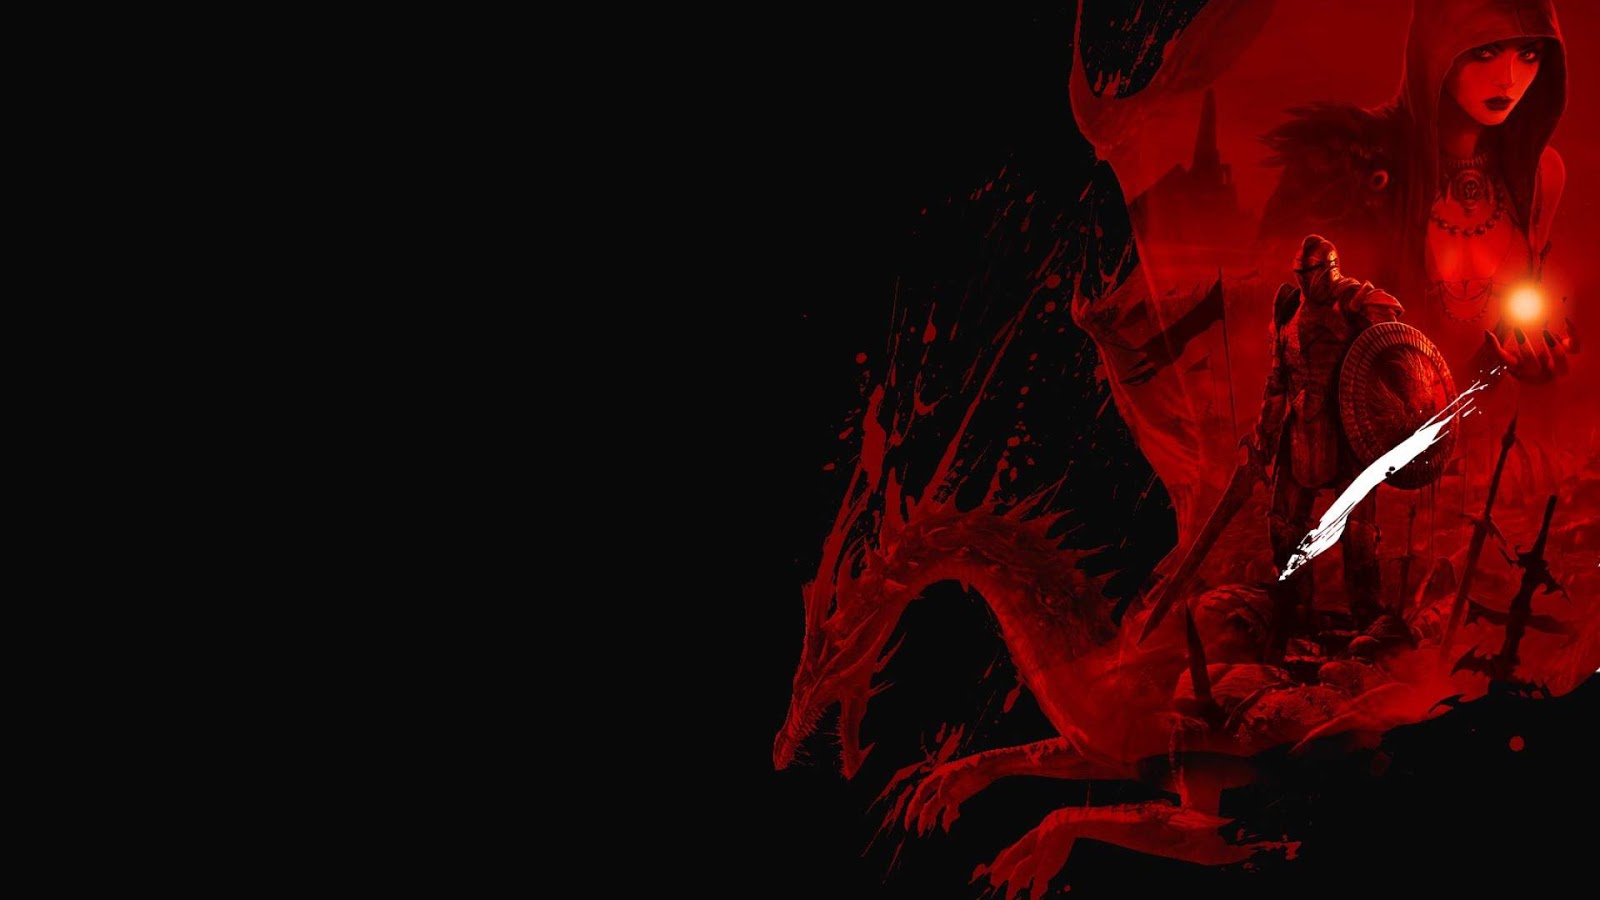 Black and White Wallpapers Dragon Age Blood Red Dragon Black Red